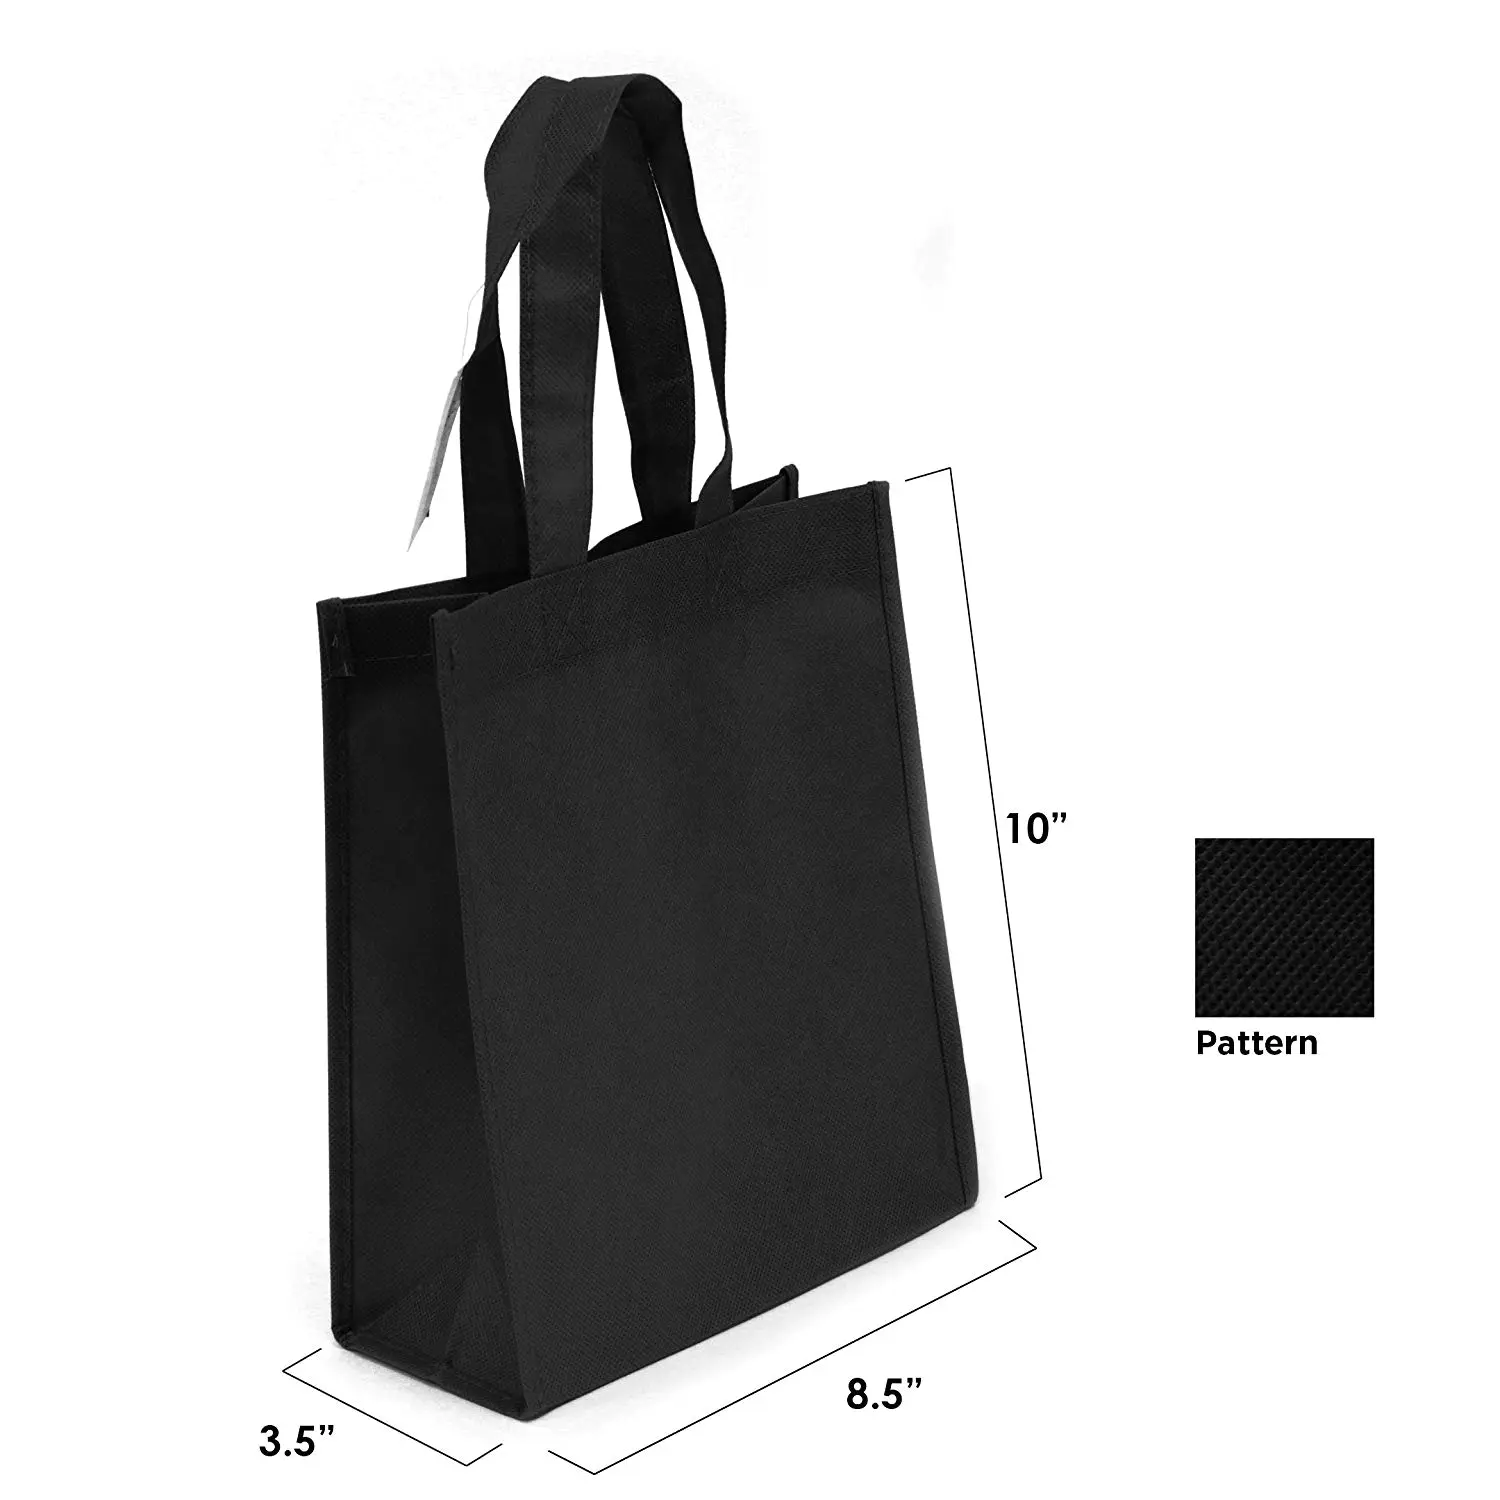 Sunshine non woven carry bags wholesale for home